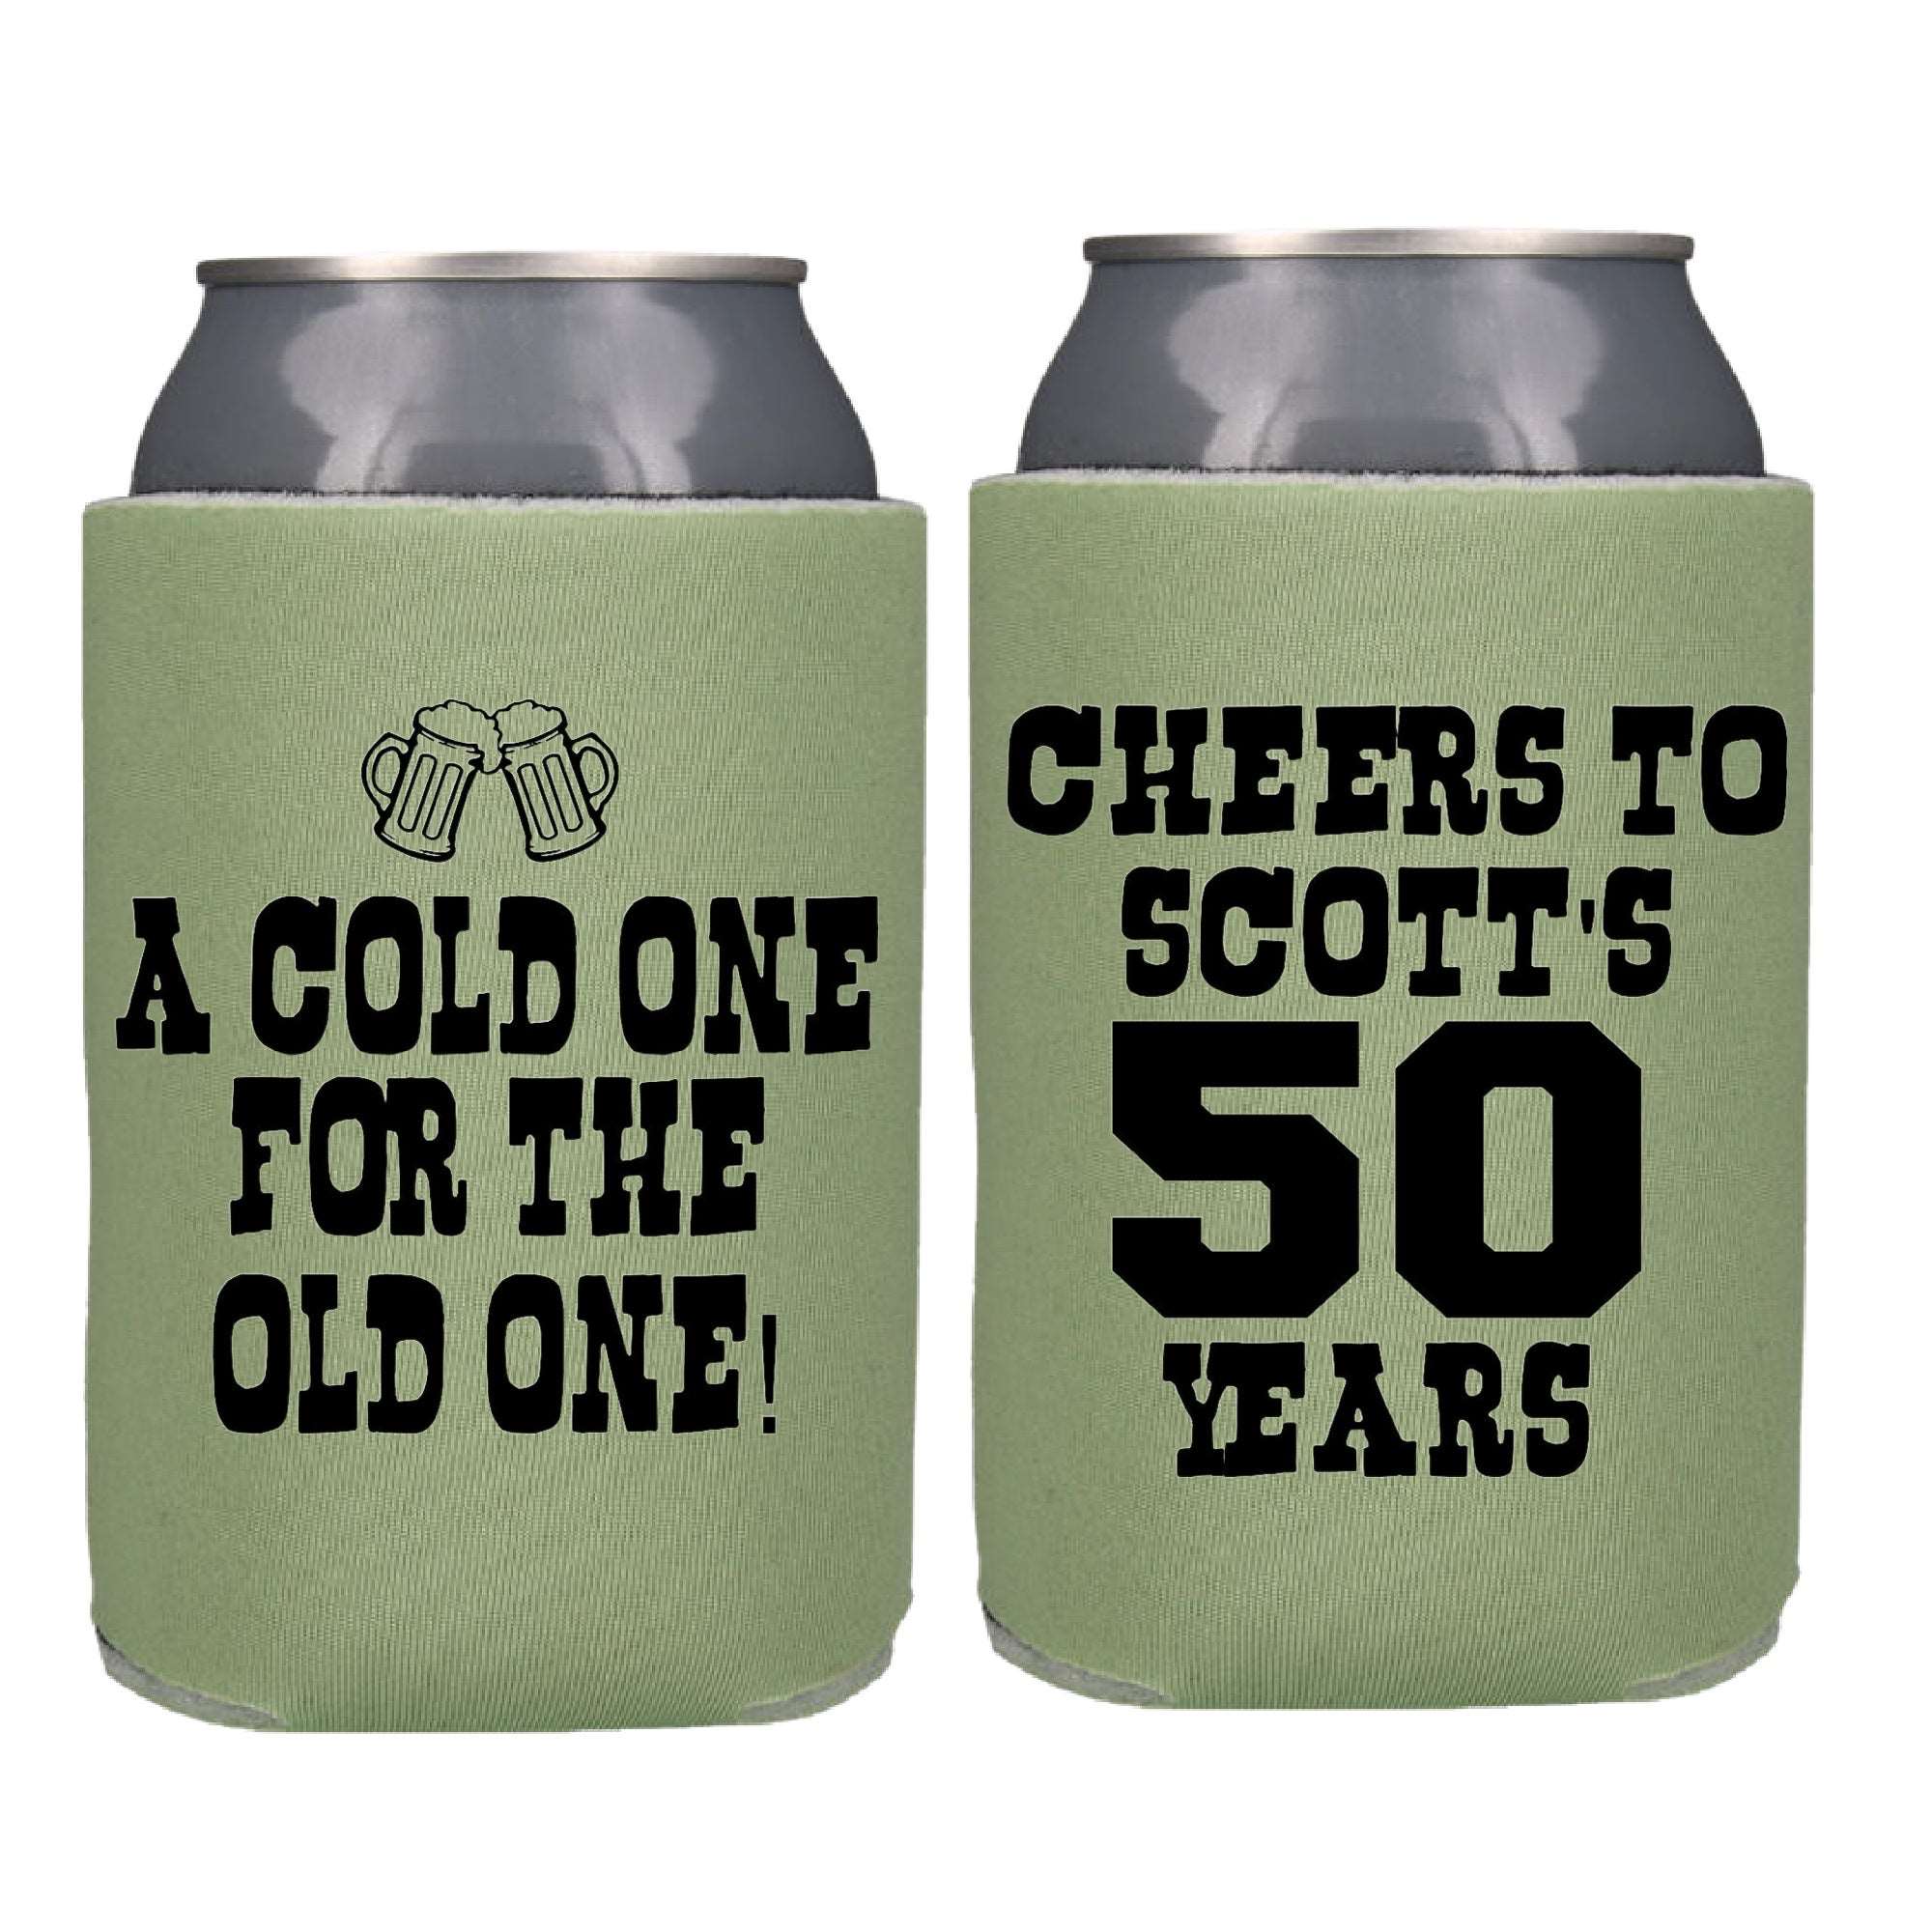 A Cold One For the Old One Screen Printed Can Cooler birthday party – Be  Vocal Designs